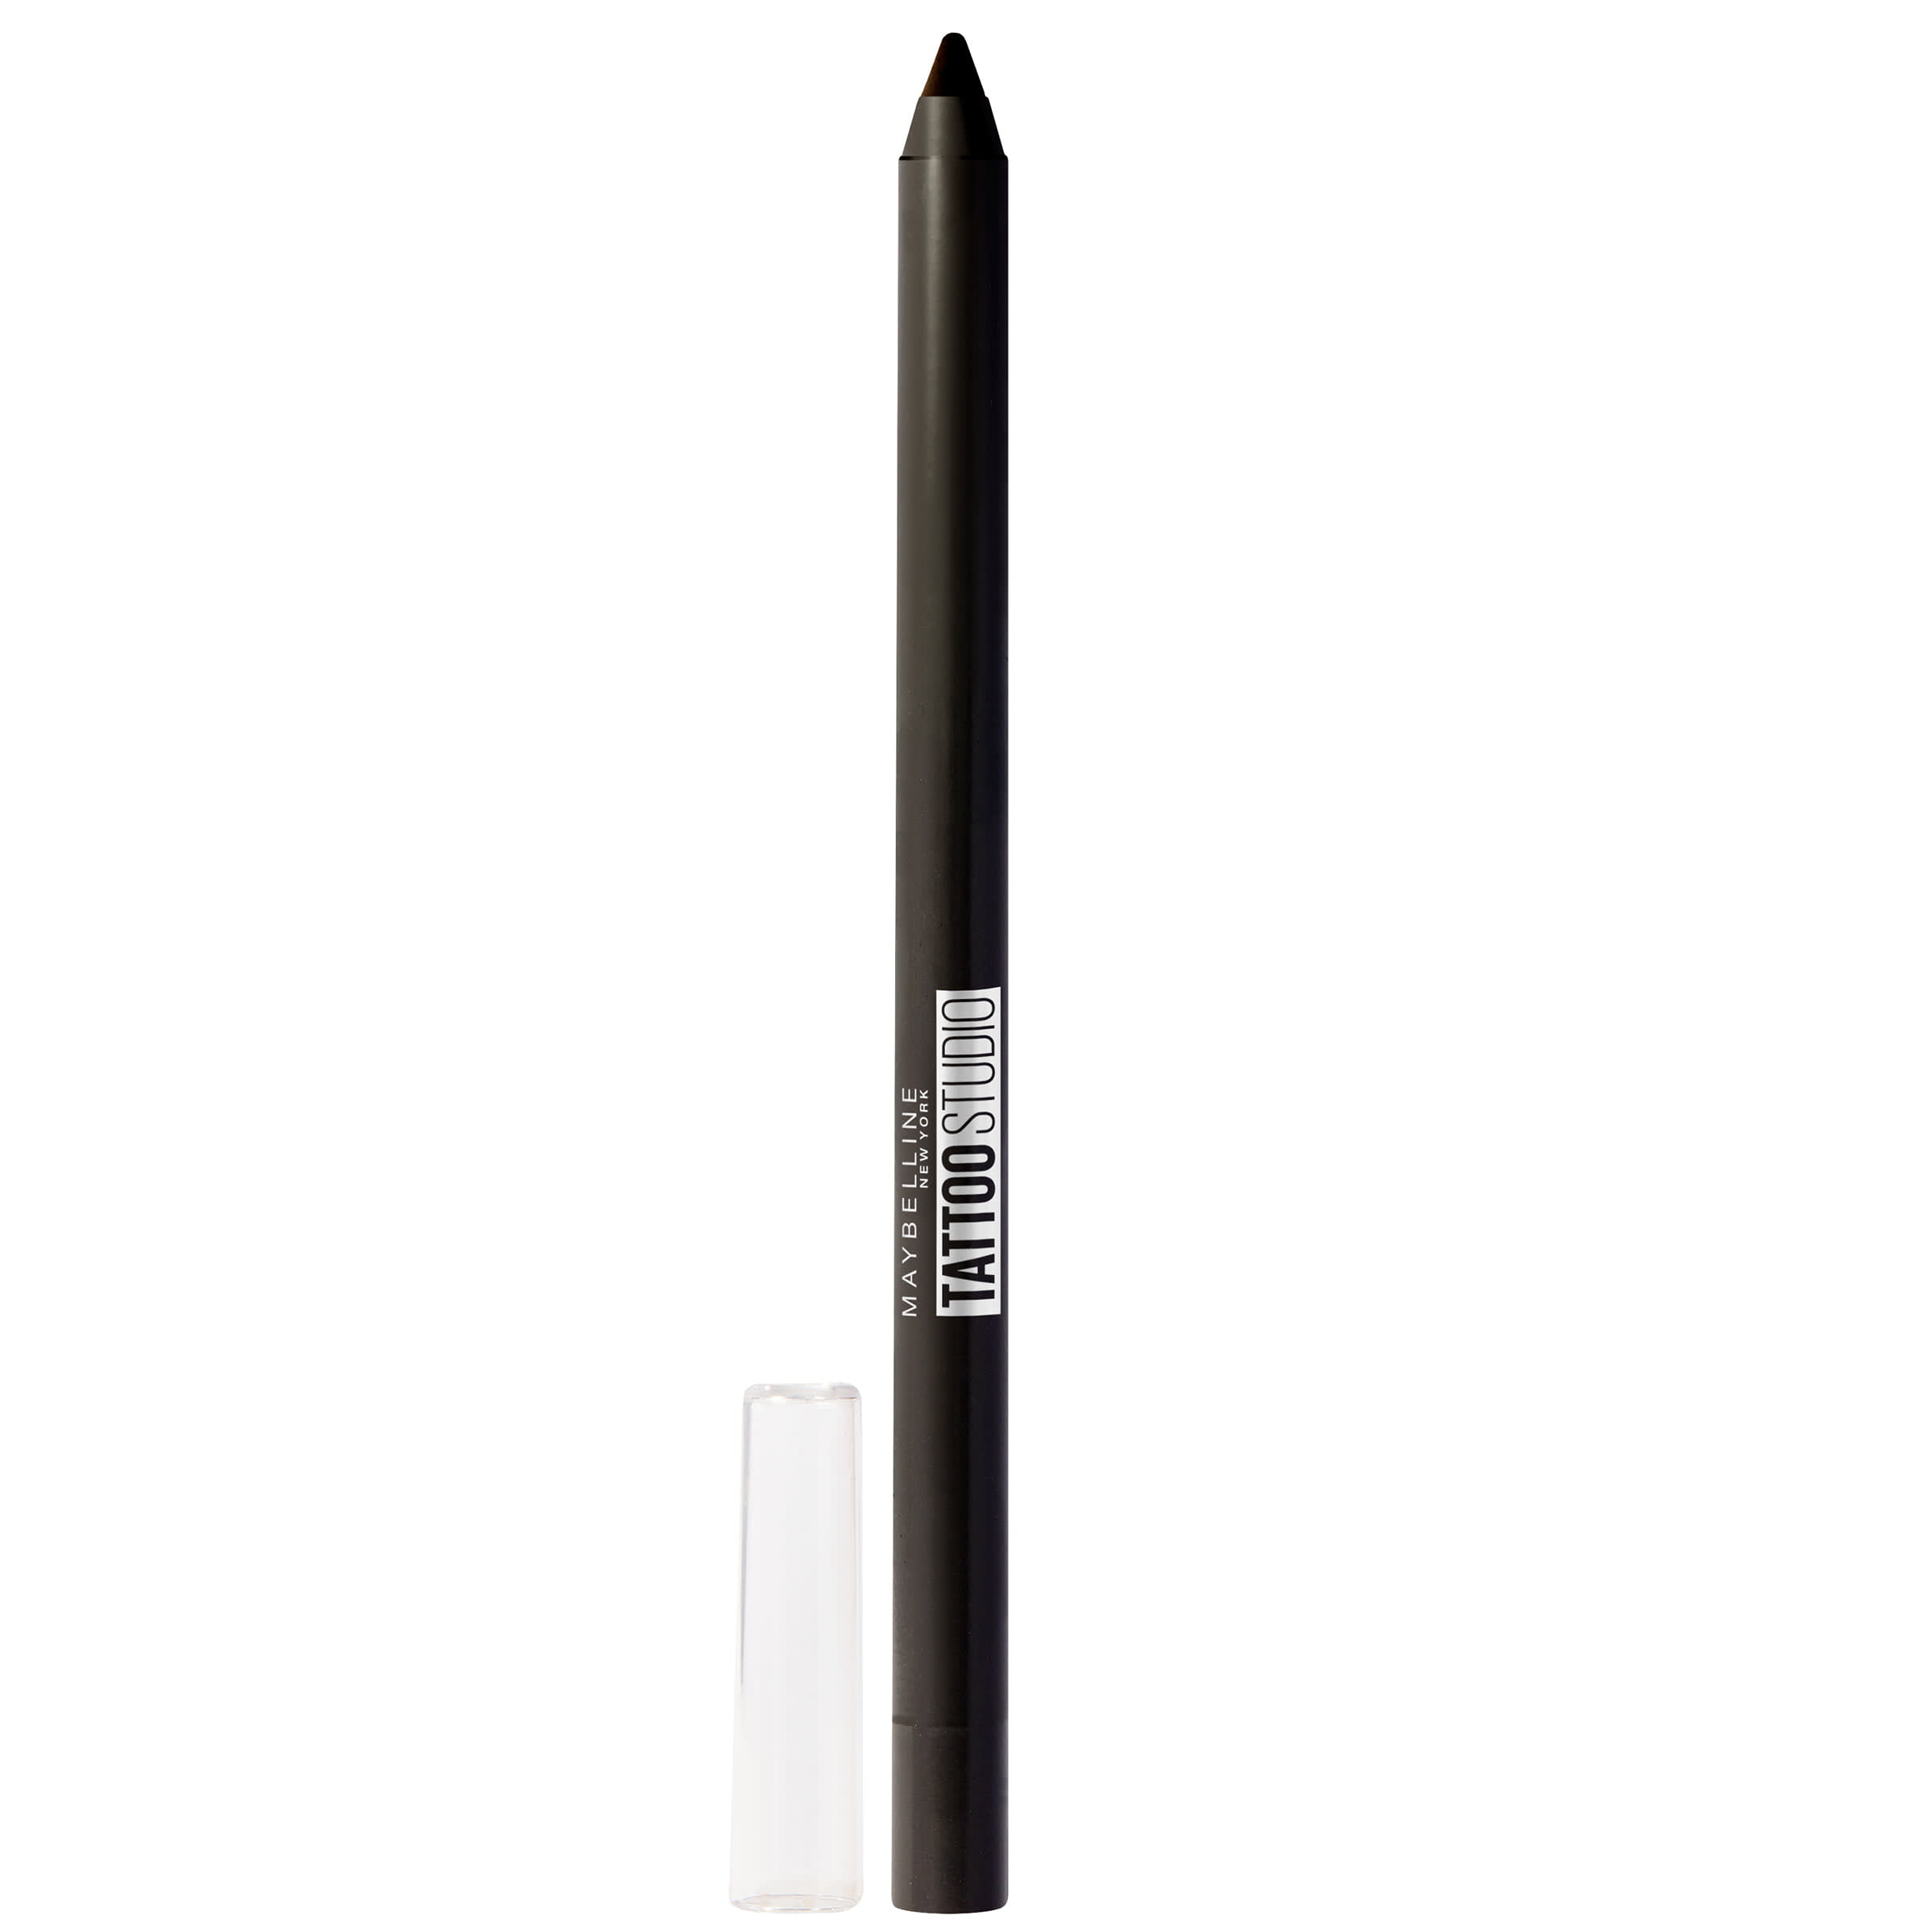 Maybellines Tattoo Studio Brow Tint Pen Review With Photos  Allure